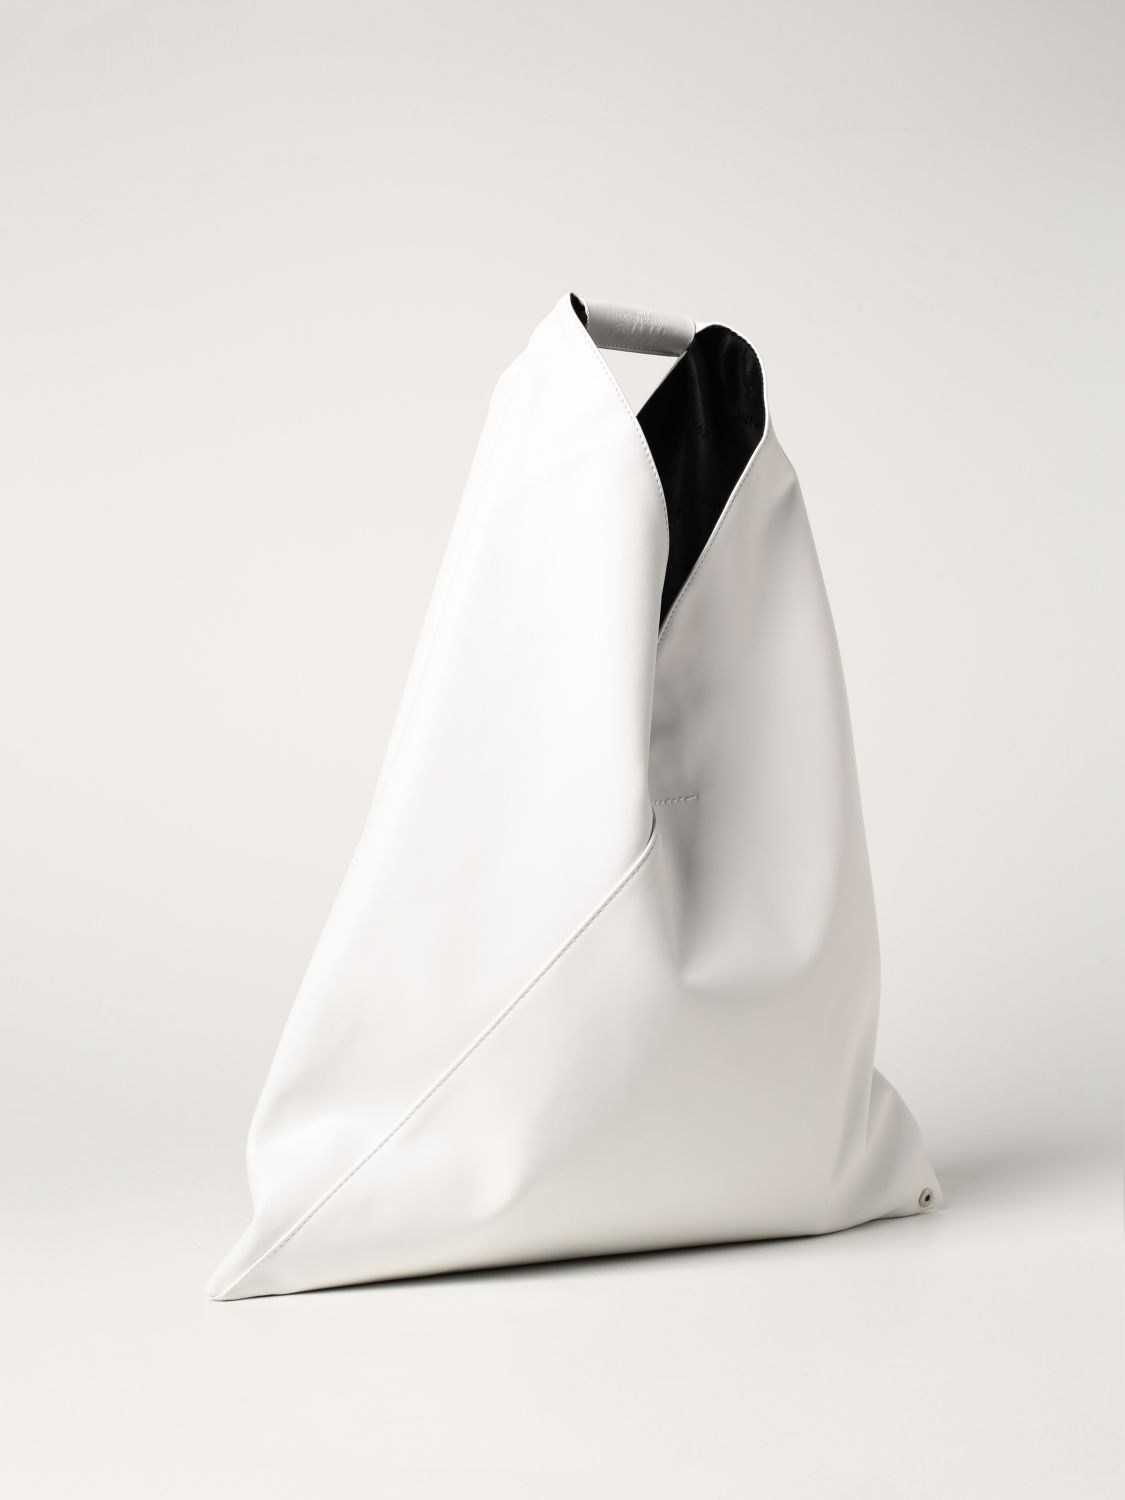 MM6 MAISON MARGIELA: Japanese bag in synthetic leather - White | Mm6 ...